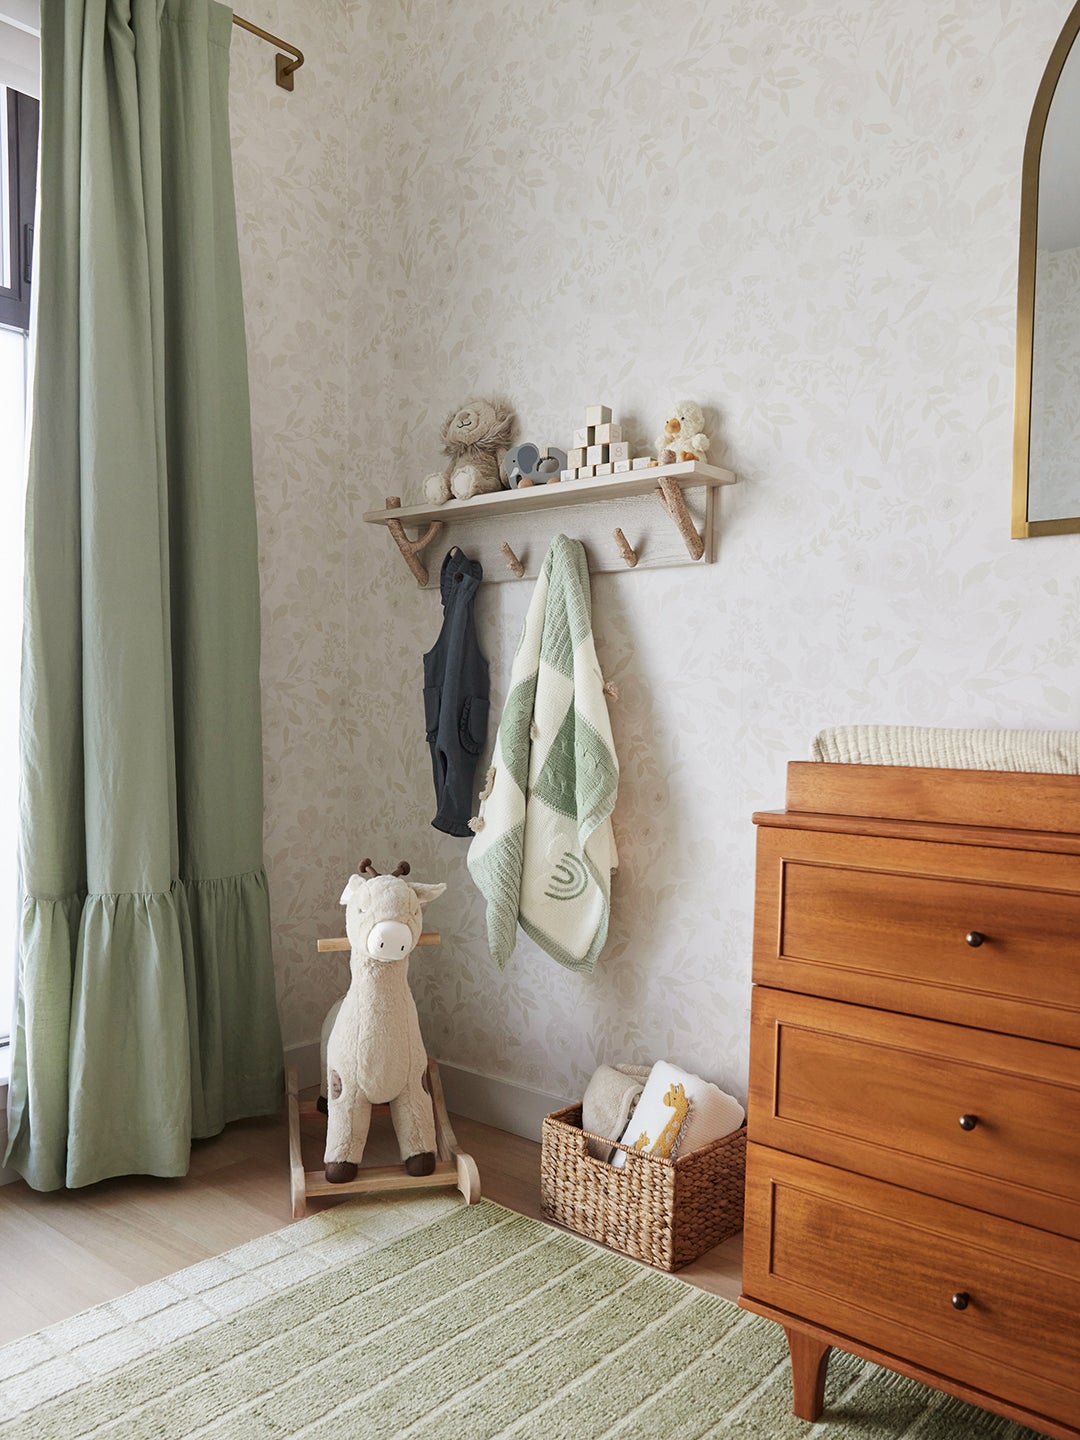 Rocking horse and hooks next to dresser in nursery